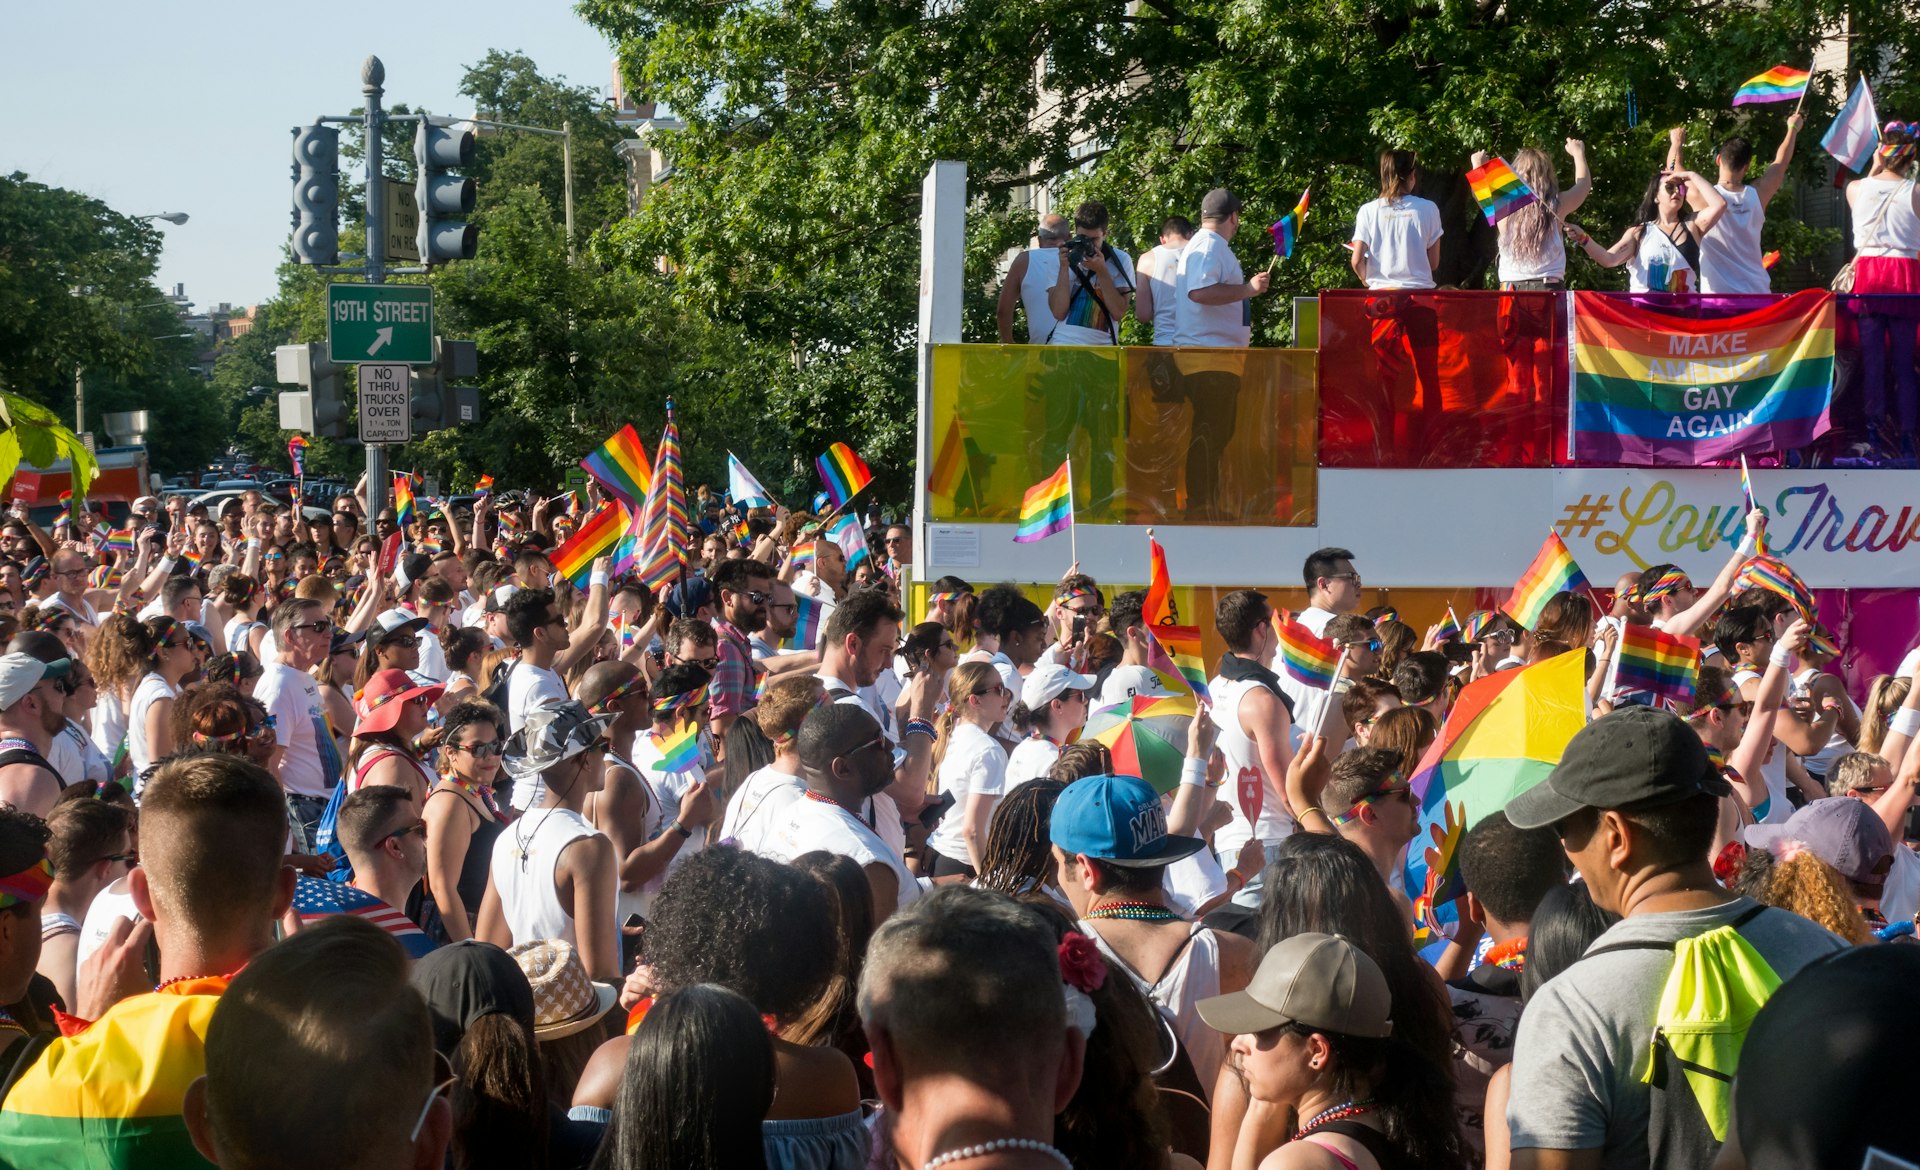 A crowd of onlookers at the annual LGBT Capital Pride Parade near Dupont Circle in Washington, DC